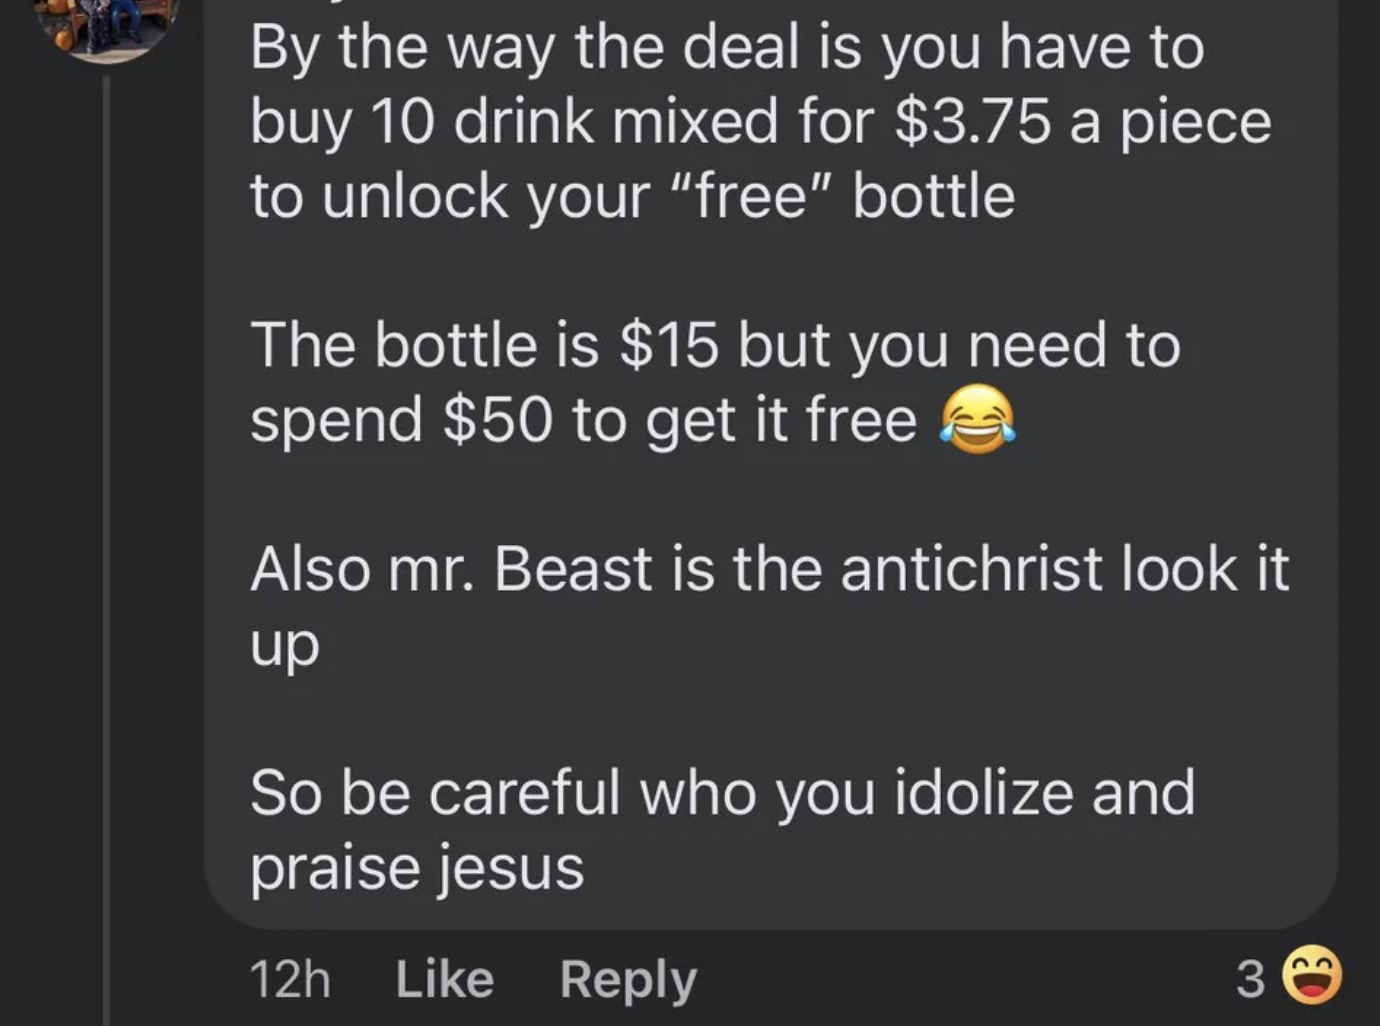 screenshot - By the way the deal is you have to buy 10 drink mixed for $3.75 a piece to unlock your "free" bottle The bottle is $15 but you need to spend $50 to get it free Also mr. Beast is the antichrist look it up So be careful who you idolize and prai